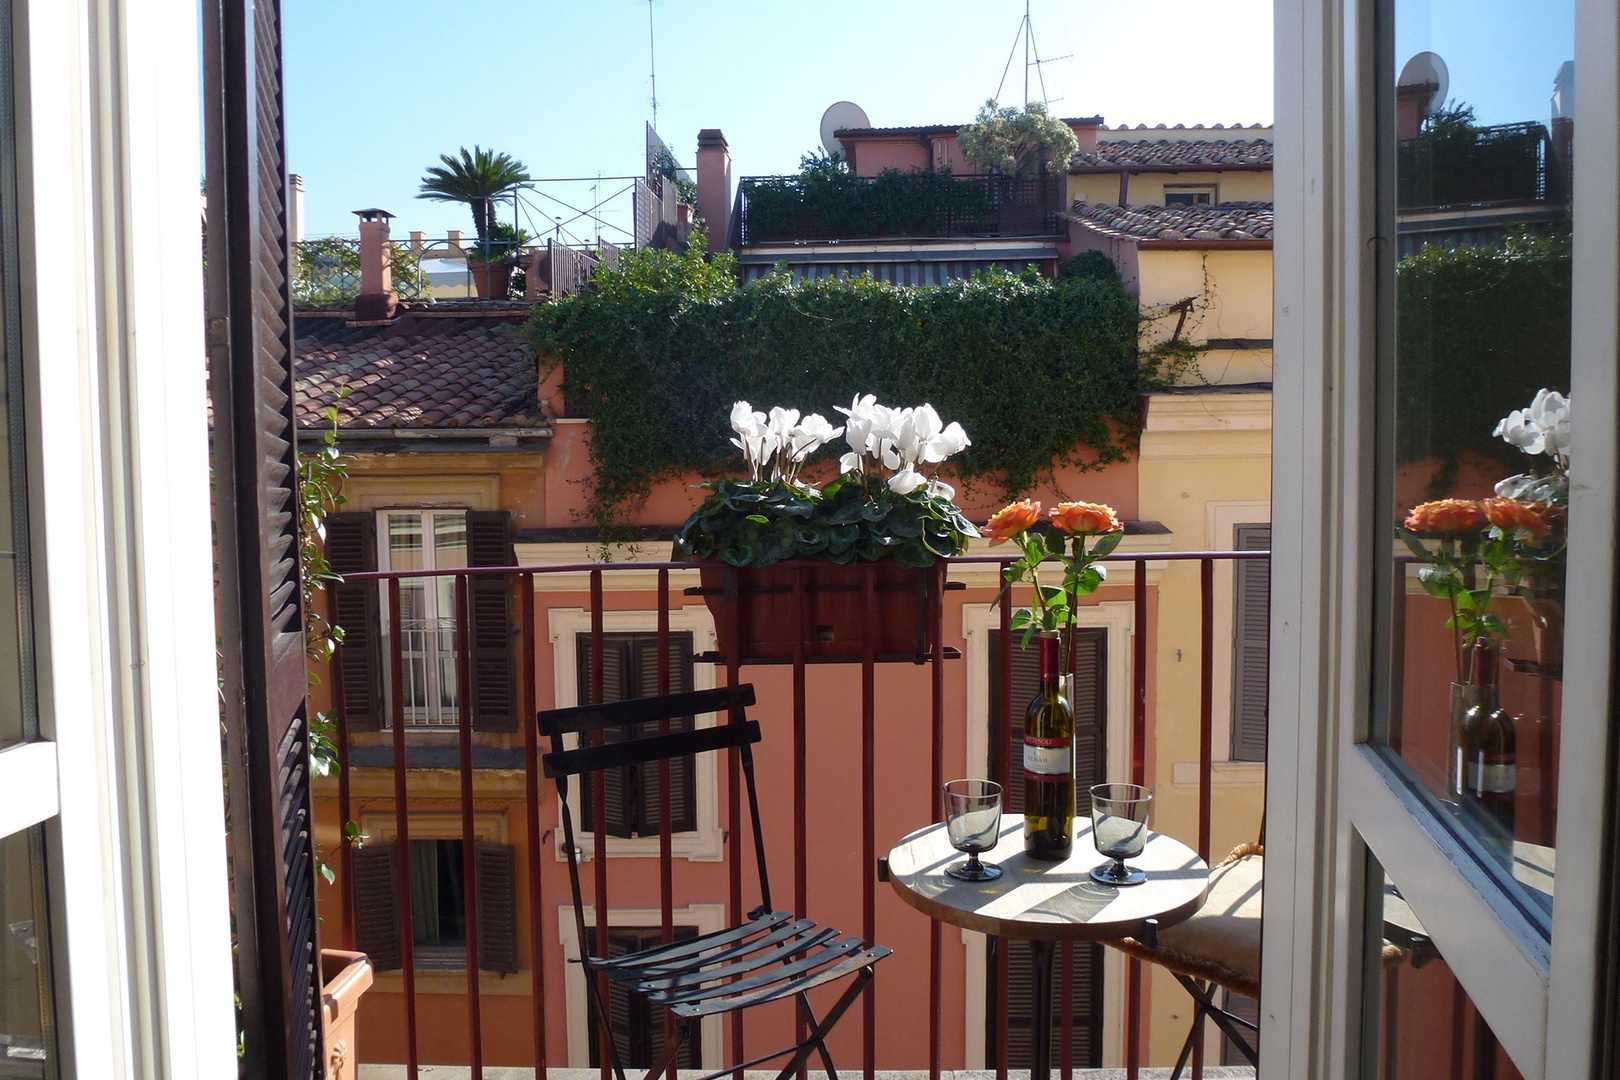 Greet the sun or sunset from your balcony overlooking Roman rooftops.